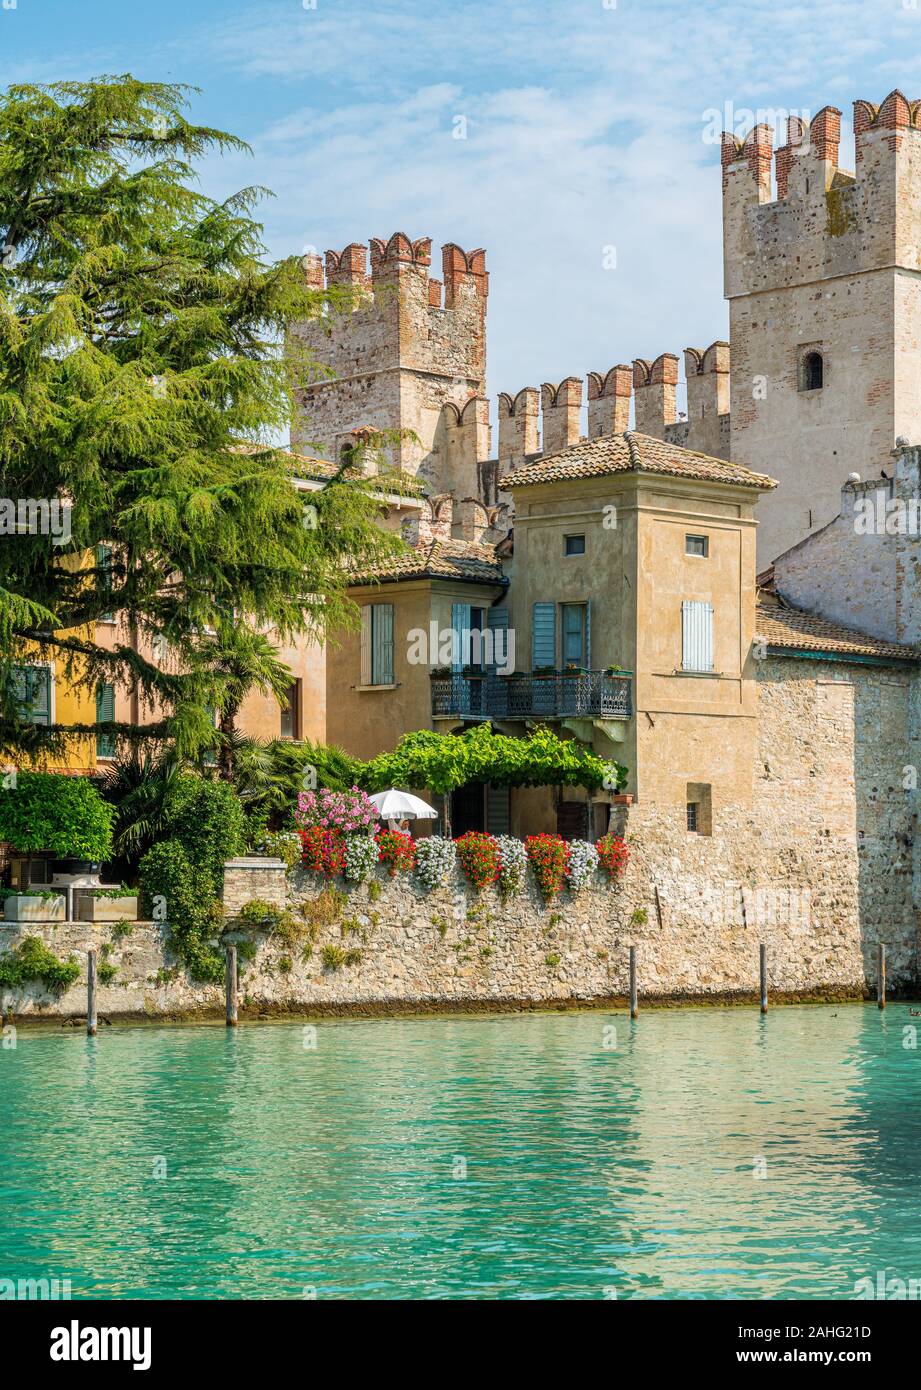 The picturesque town of Sirmione, on Lake Garda, Province of Brescia, Lombardy, Italy. Stock Photo